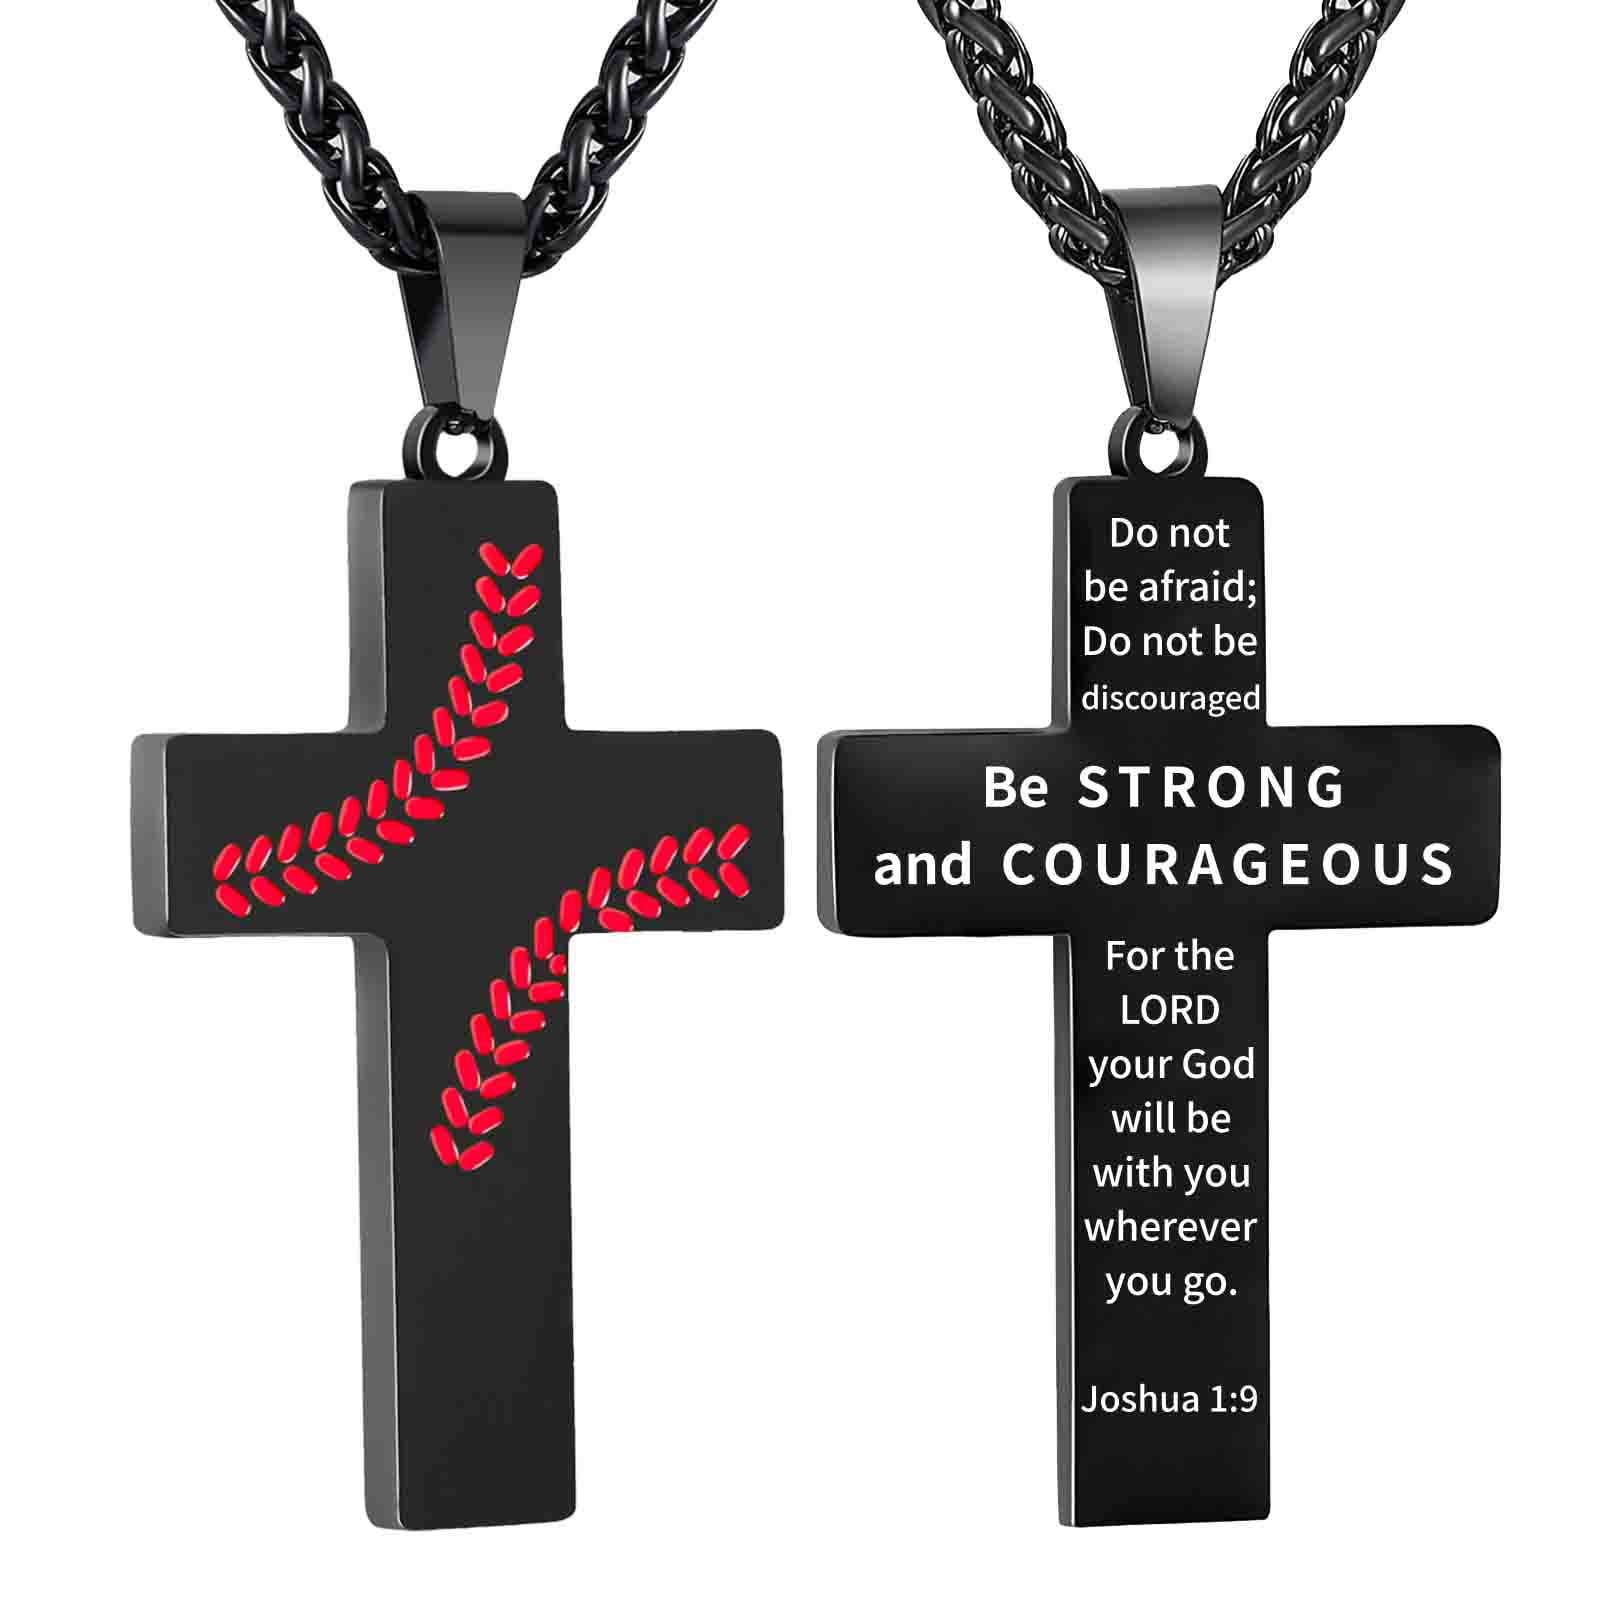 Baseball Cross Necklace Men Boys Stainless Steel Pendant Chain First Communion Confirmation Religious Christian Jewelry Gift Inspirational Bible Vers c9242912 ab44 4206 aec0 92dba0528222.1e6f0958668f241a262bfe801b40100b